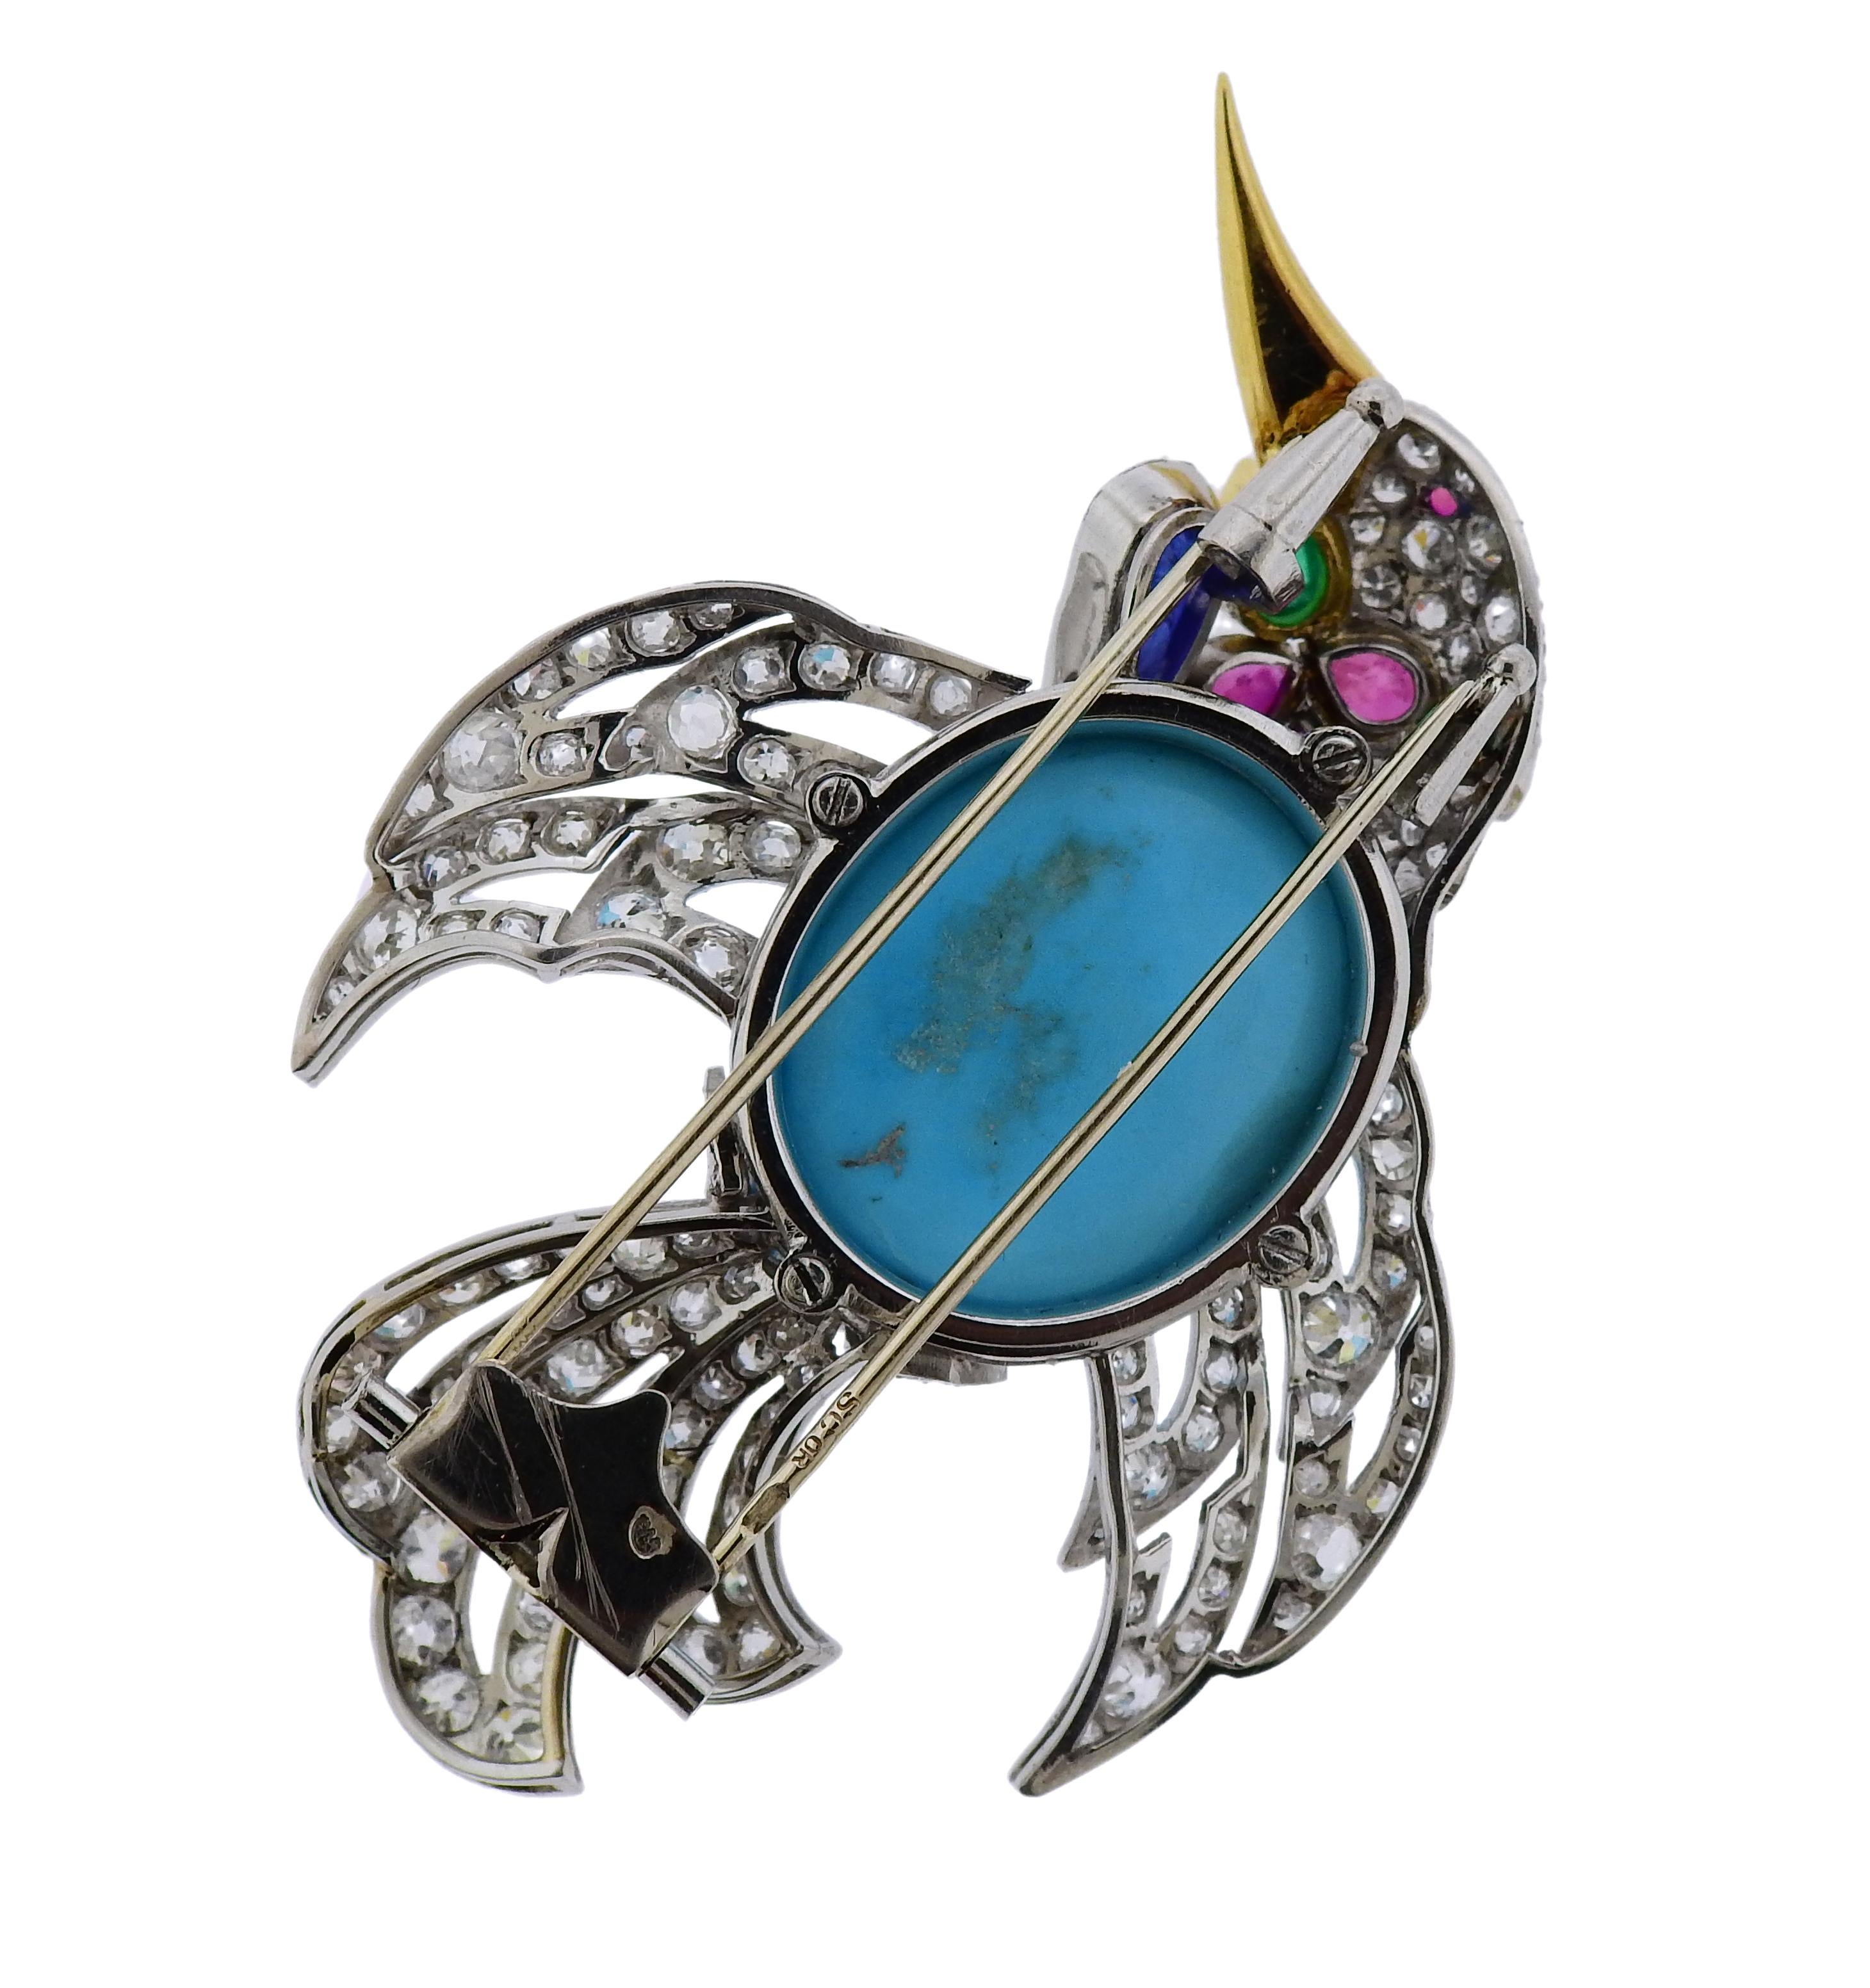 Austrian platinum bird brooch, set with a turquoise, carved sapphire, emerald cabochon, faceted rubies and approx. 13 carats in diamonds. Brooch measures: 63mm x 45mm. Weight is 32 grams. Marked: SG OK, assay marks.